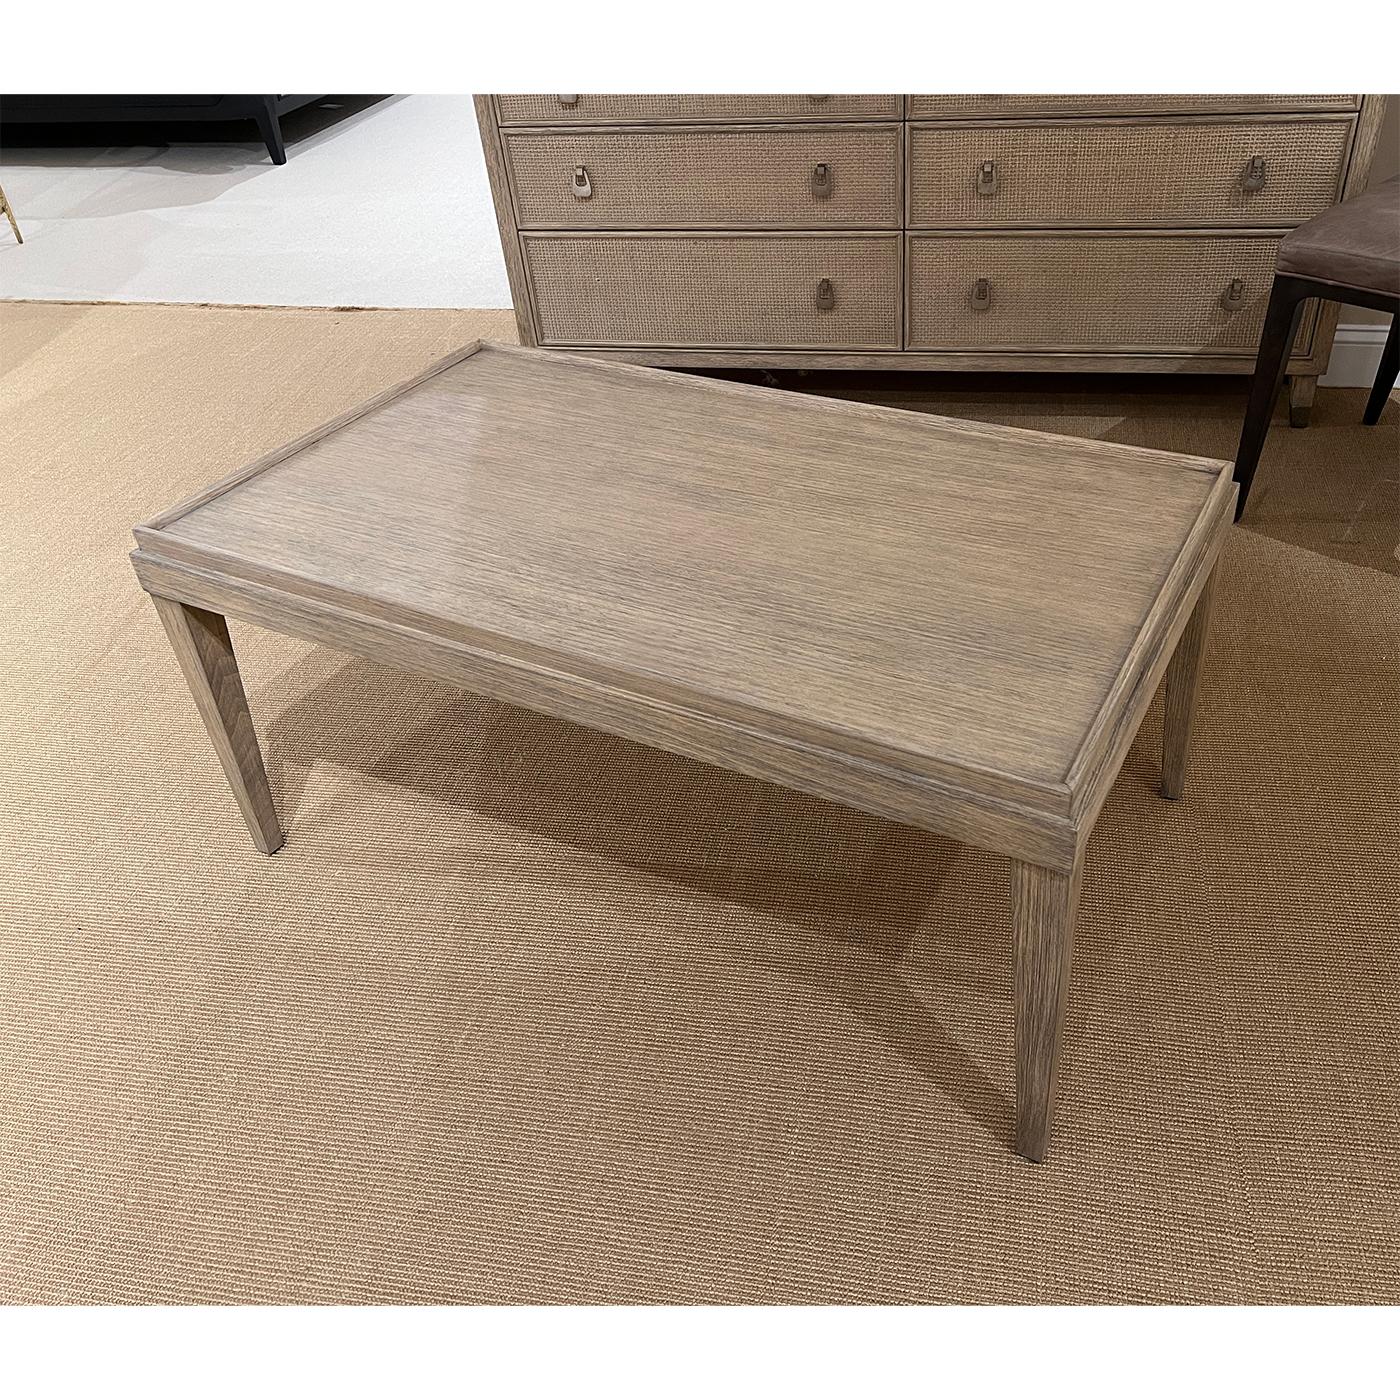 Classic Rustic rectangular coffee table with our unique rabbit finish. With a wooden galleried top, with square tapered legs.

The finish is our 'rabbit' with a wire-brushed texture and grey ceruse subtle highlights.

Dimensions: 42 × 24 × 19 in